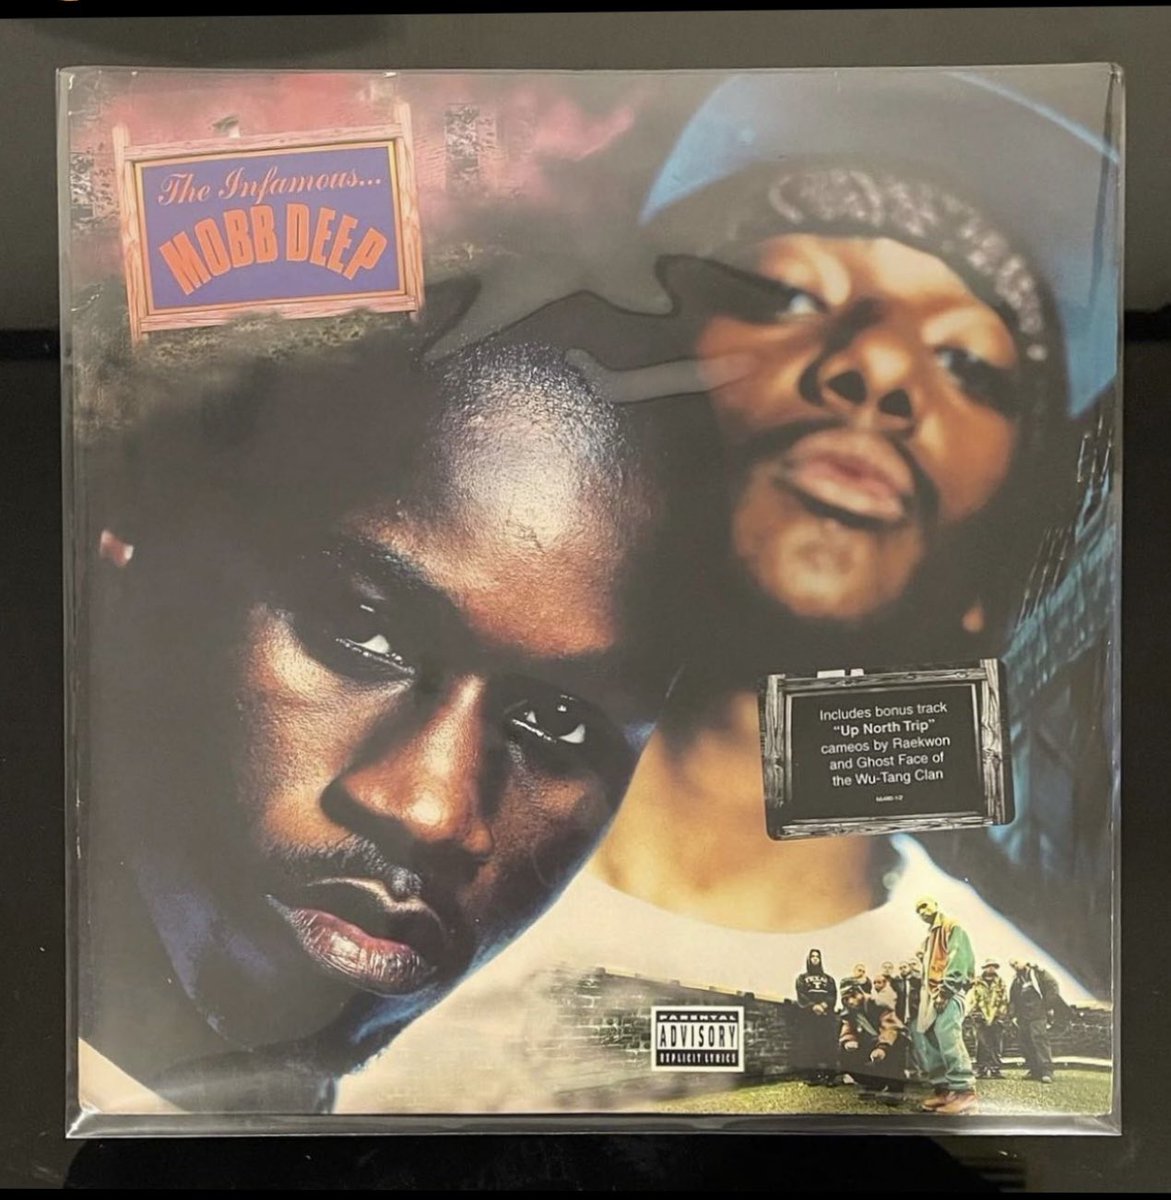 Mobb Deep (R.I.P Prodigy) “The Infamous” 1995 Original U.S Press Released 29 years ago today